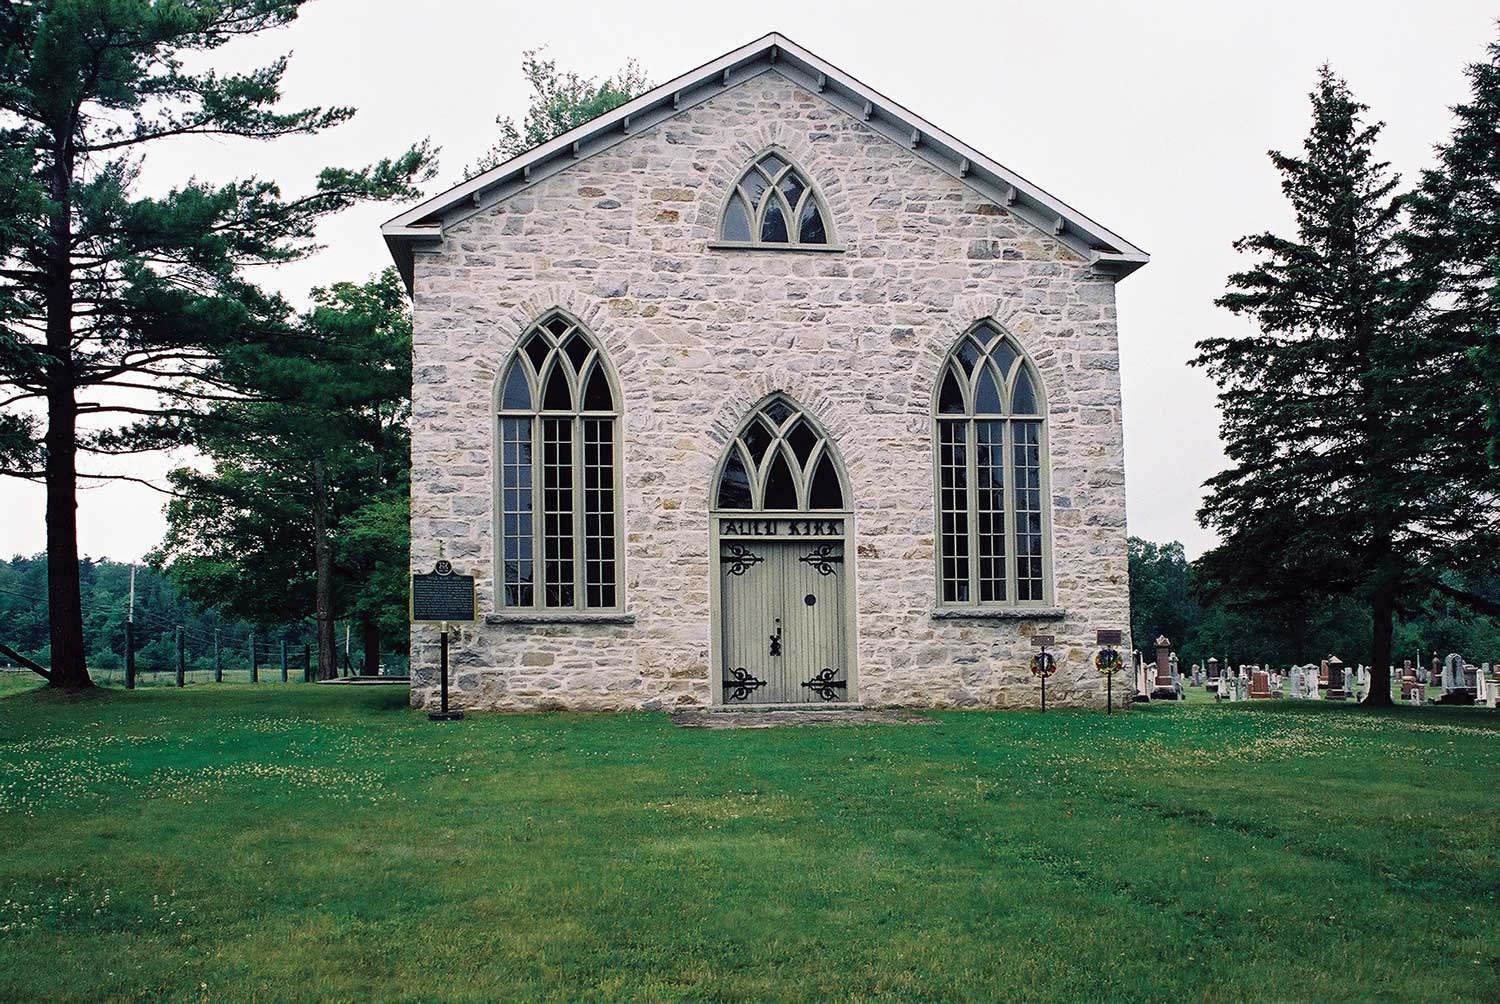 Built in 1836, the Auld Kirk in Mississippi Mills is an early example of a Presbyterian church in Ontario